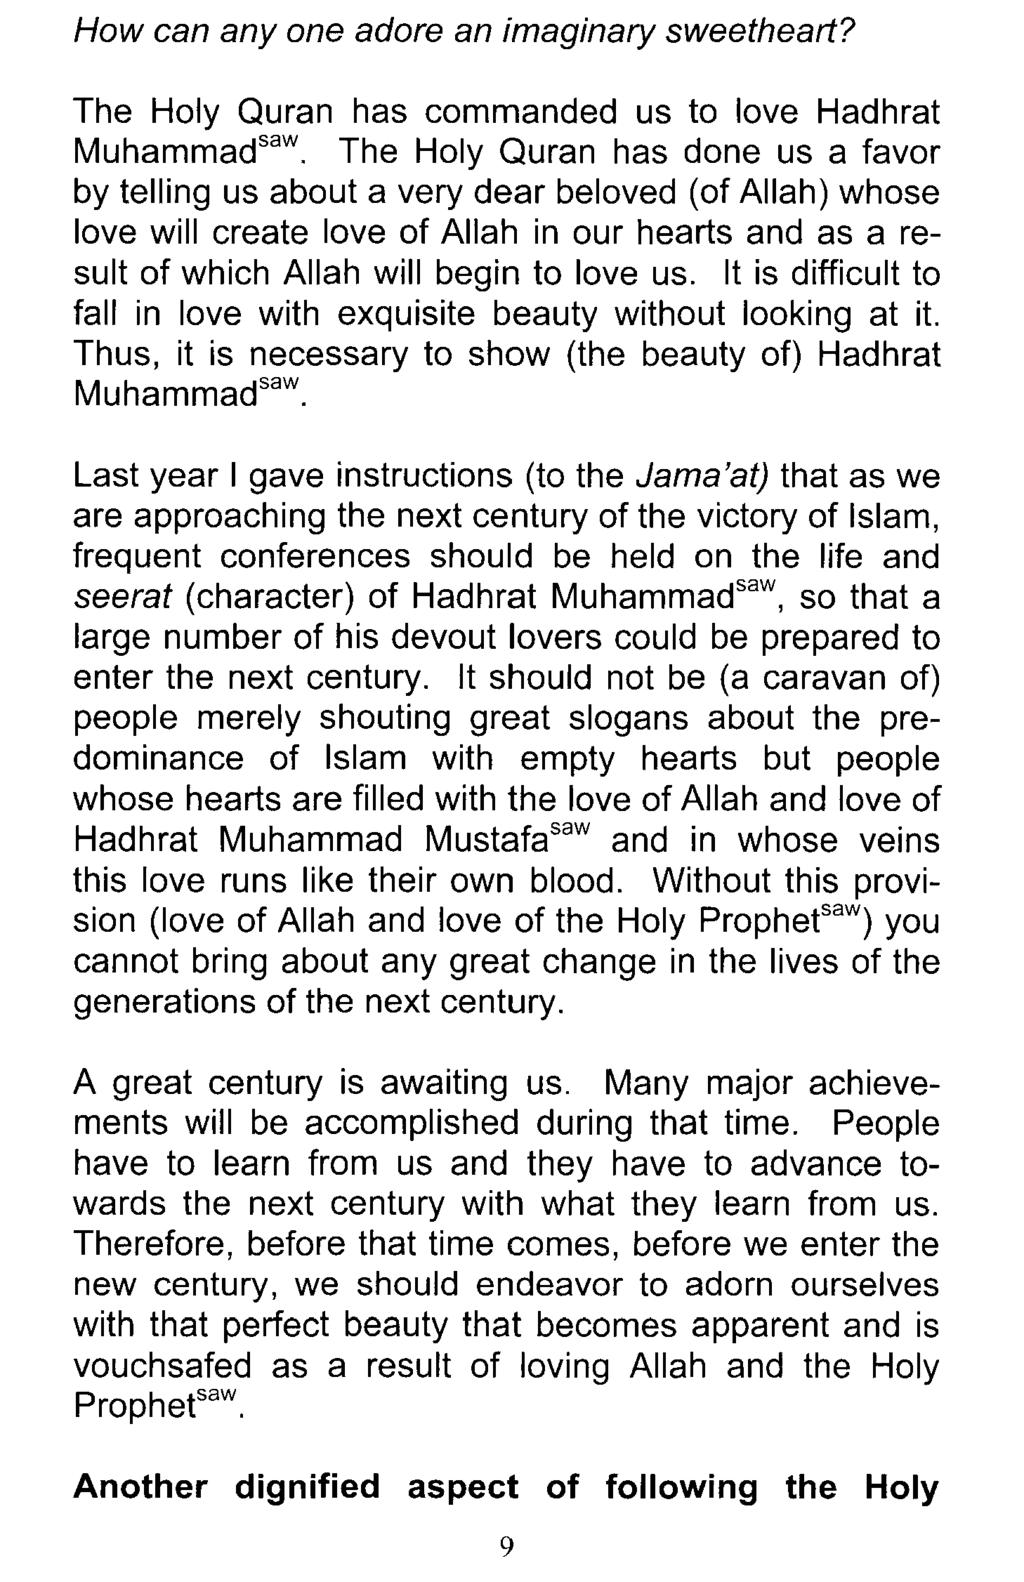 How can anyone adore an imaginary sweetheart? The Holy Quran has commanded us to love Hadhrat Muhammad saw.